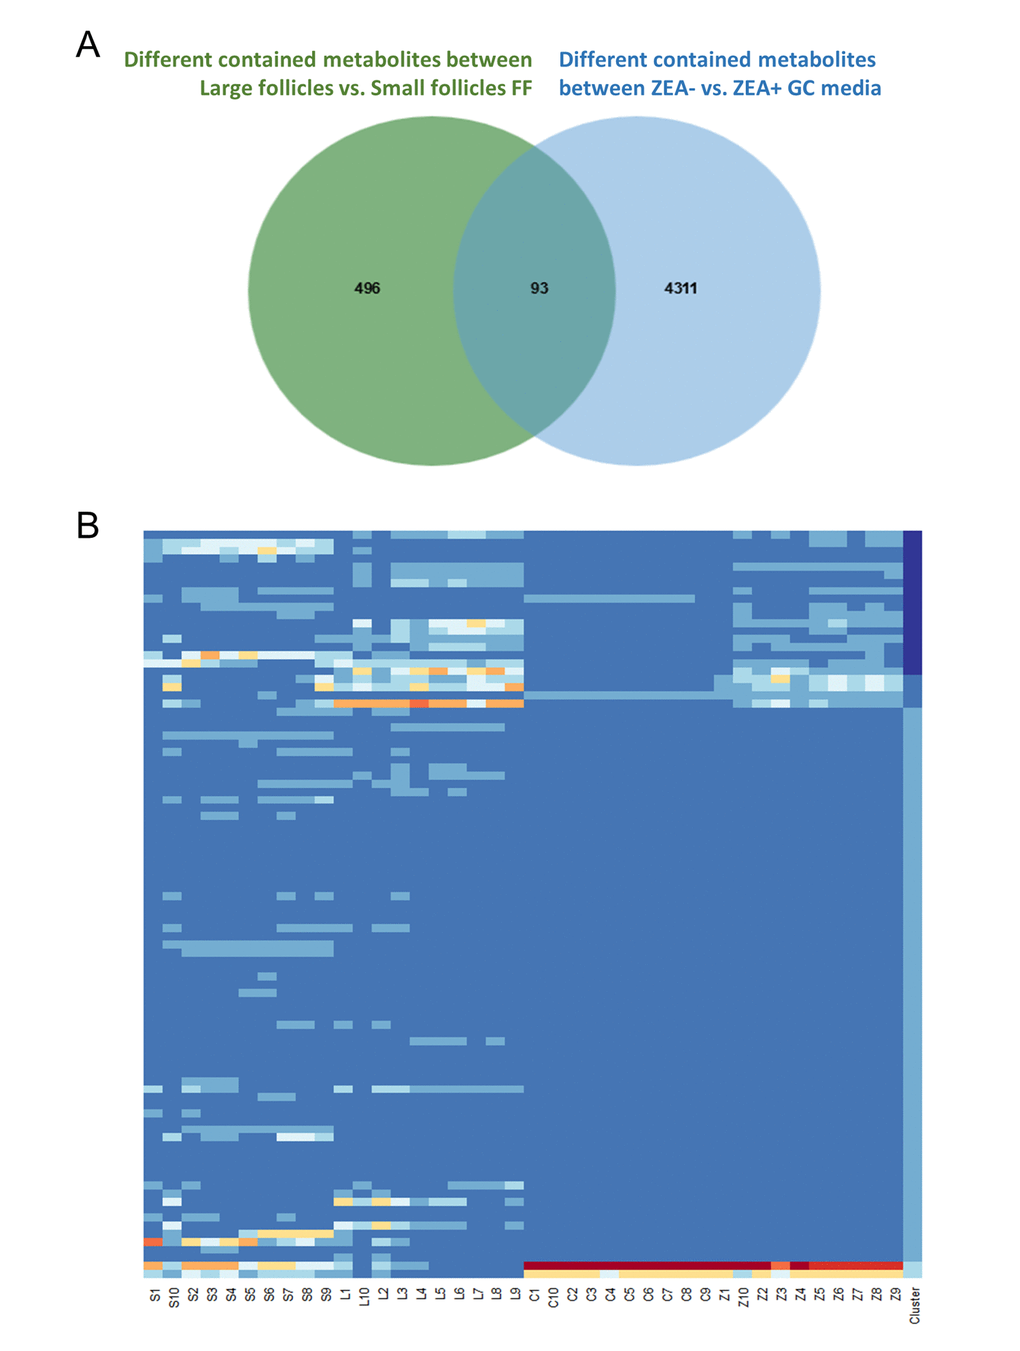 Co-exist metabolites between GC media and Follicular fluid (FF). Number of differential contained metabolites detected in the antral FF (green circle), and GC media (blue circle), the overlap showing co-existing metabolites in the FF and GC media (A). Heatmap showed the relative content of each co-existing metabolites in each group (B).